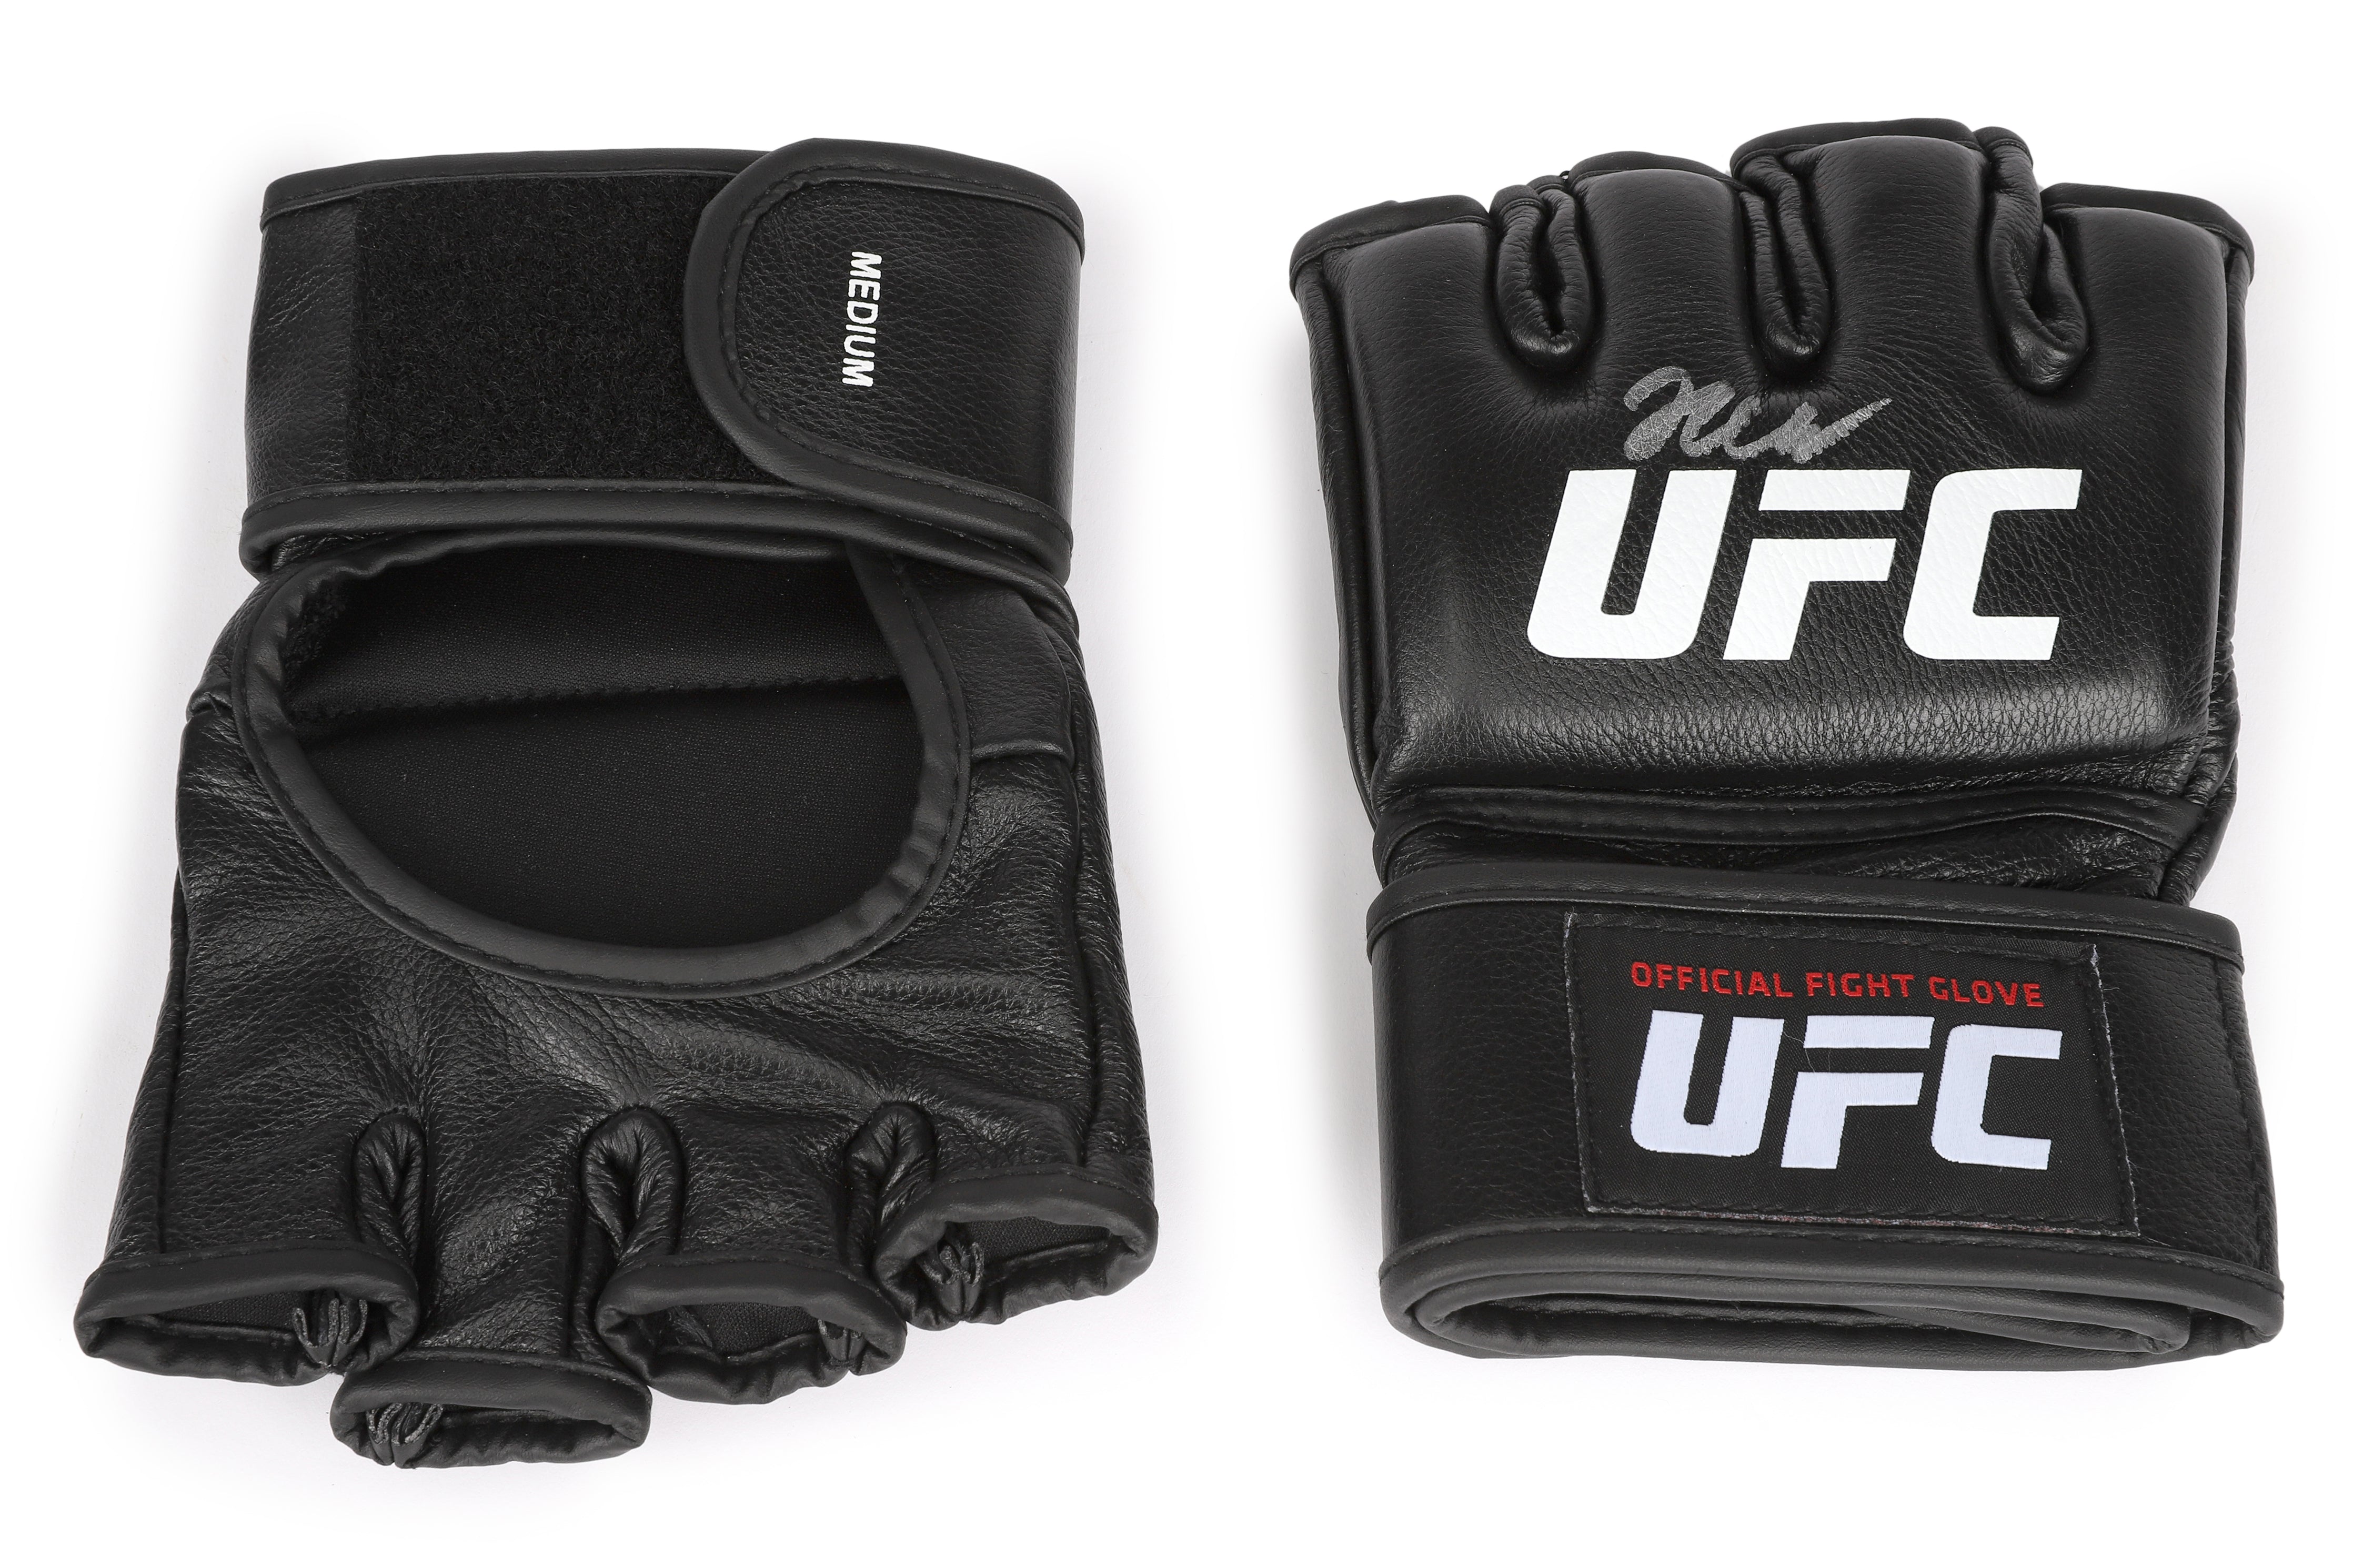 Hasbulla Signed Official UFC Gloves